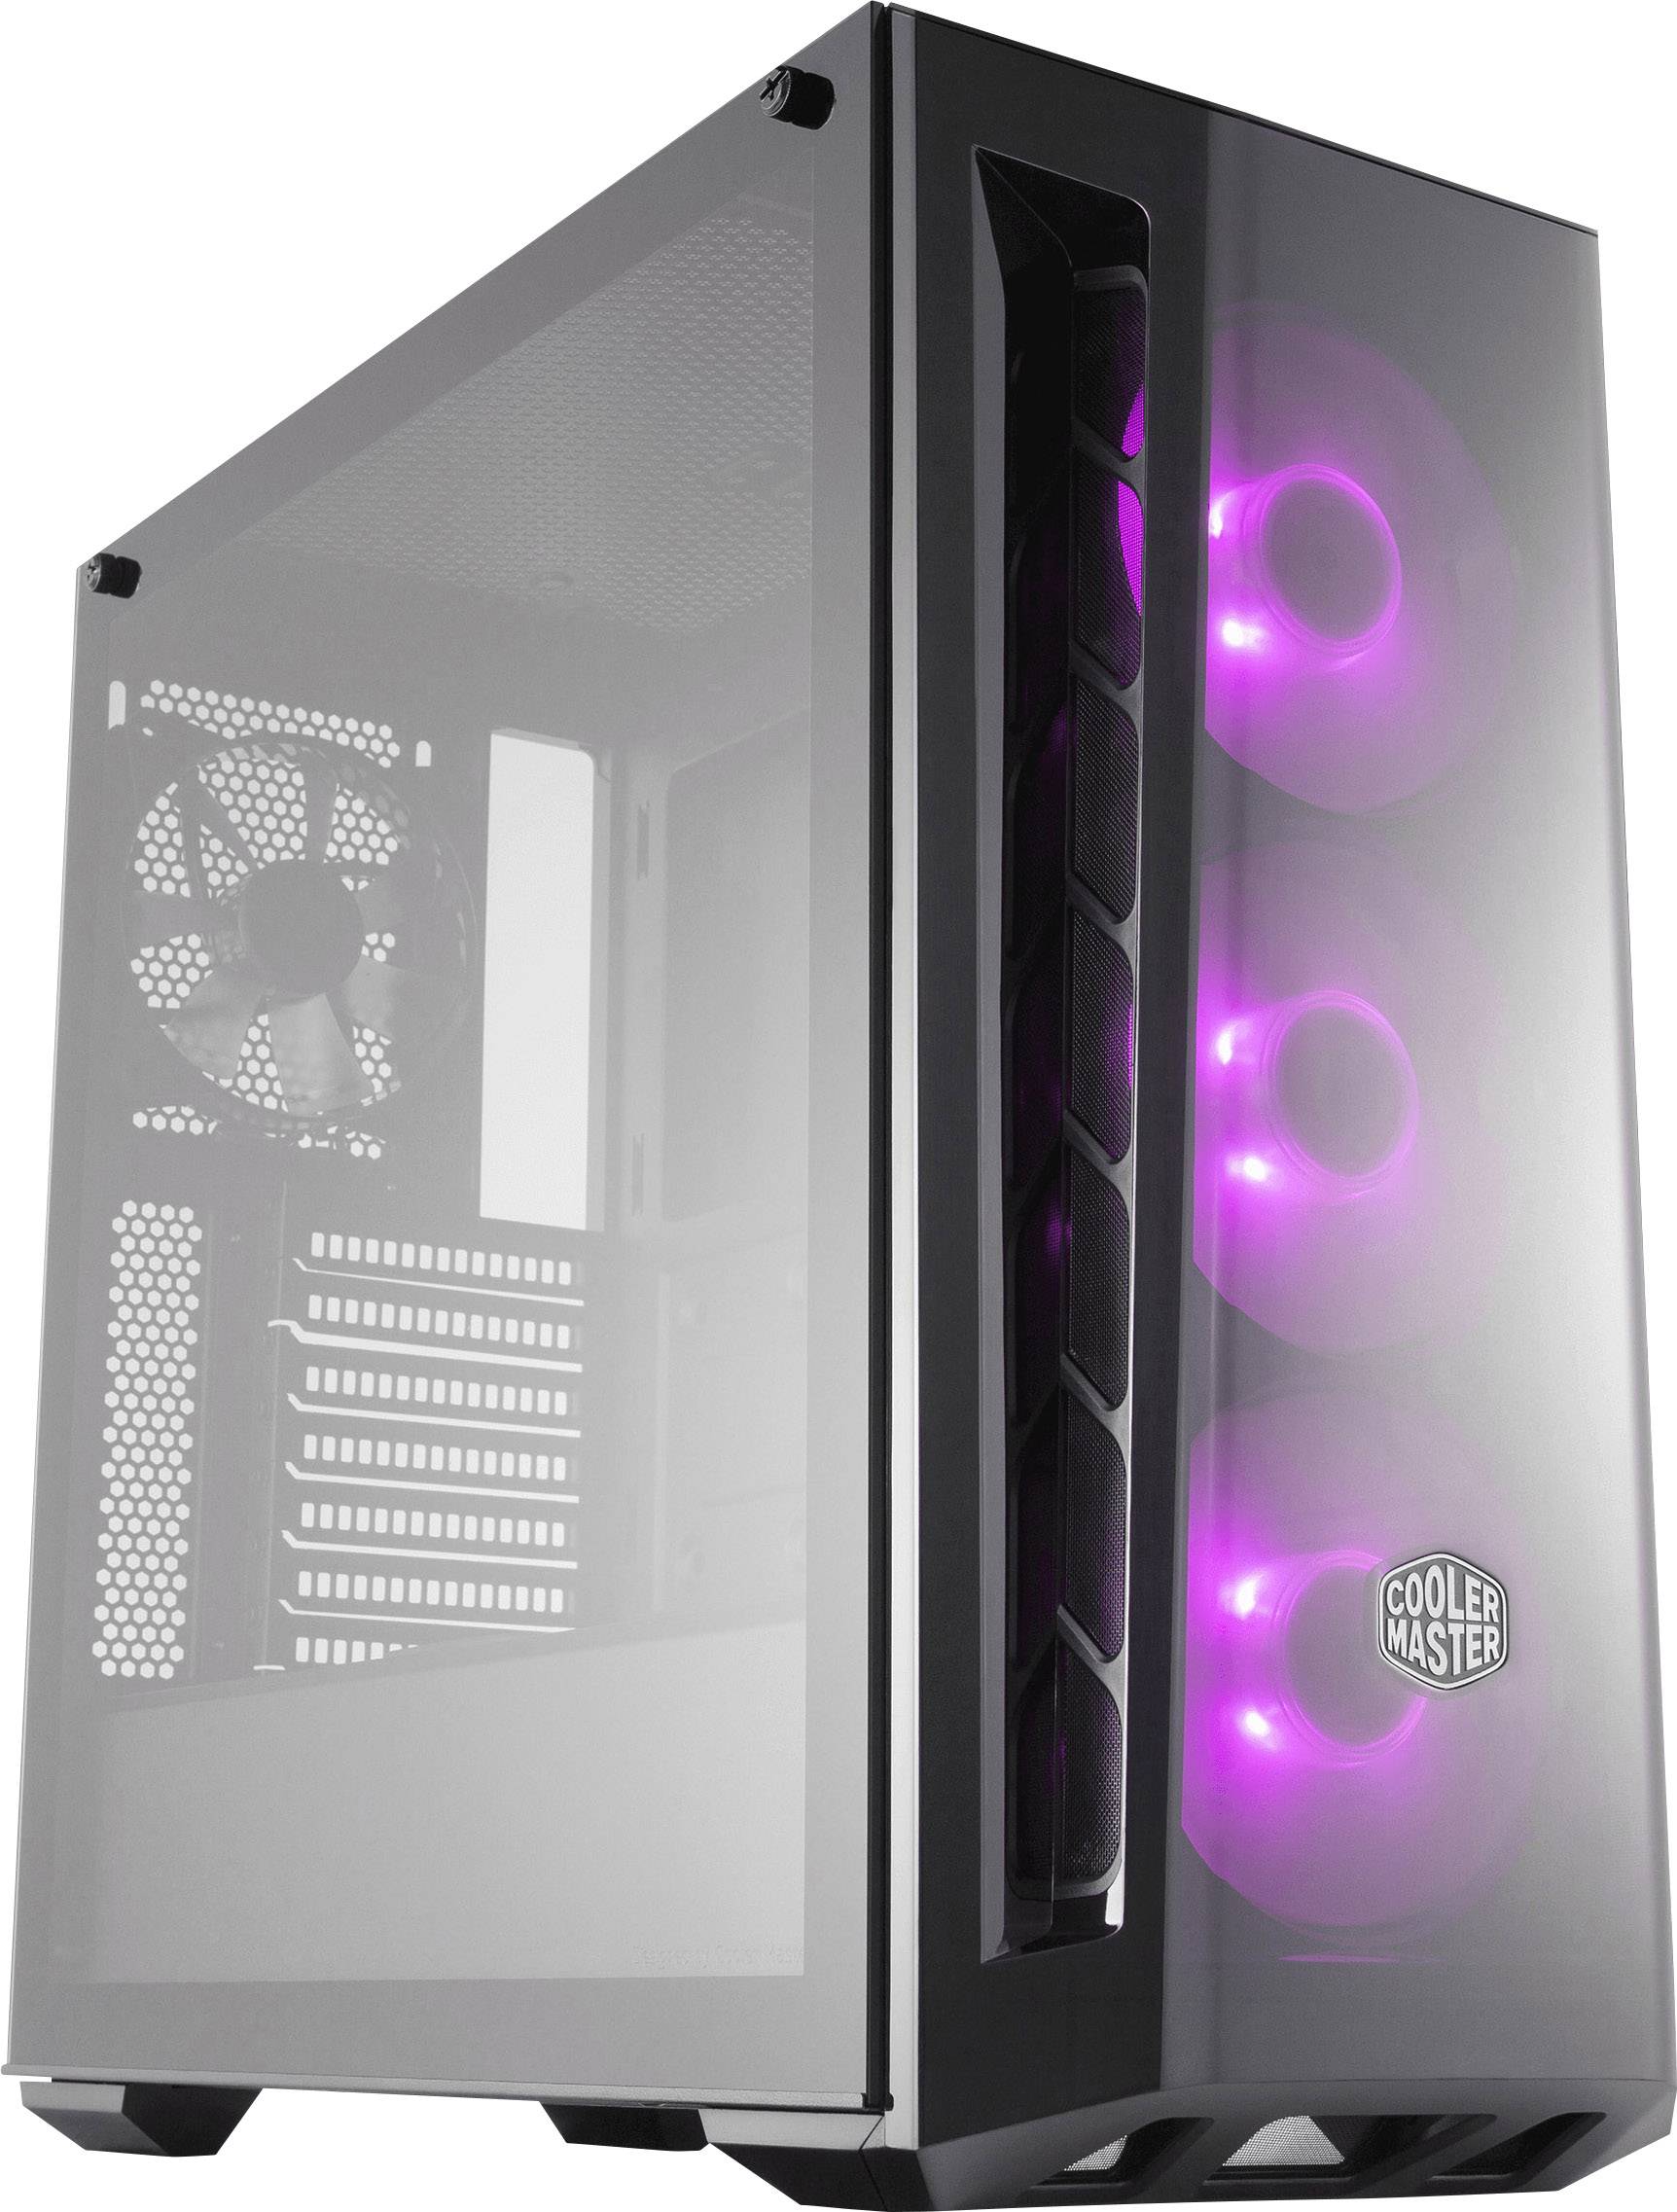 Prosper click to manage Cooler Master MasterBox MB520 RGB Midi tower PC casing Black 3 built-in LED  fans, Built-in fan, Built-in lighting, Windo | Conrad.com